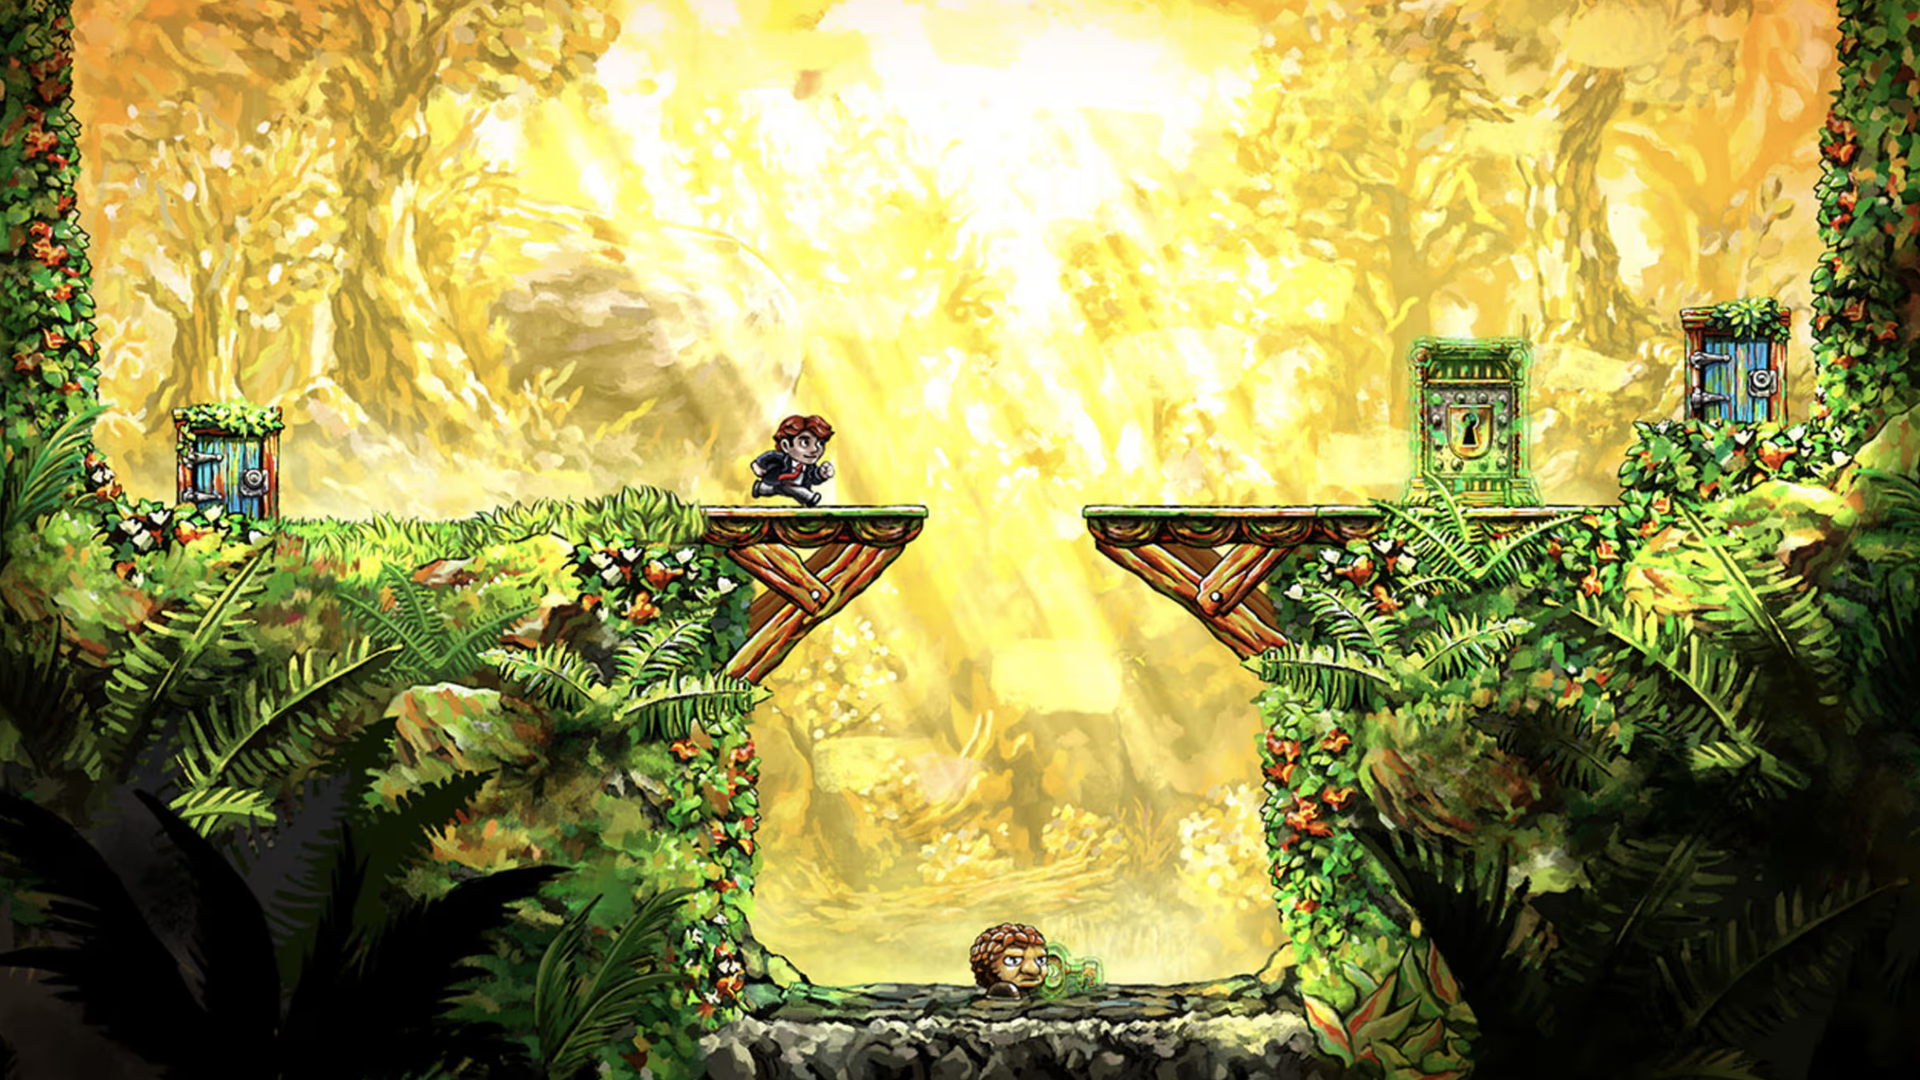 Video game screenshot of a man approaching a chasm